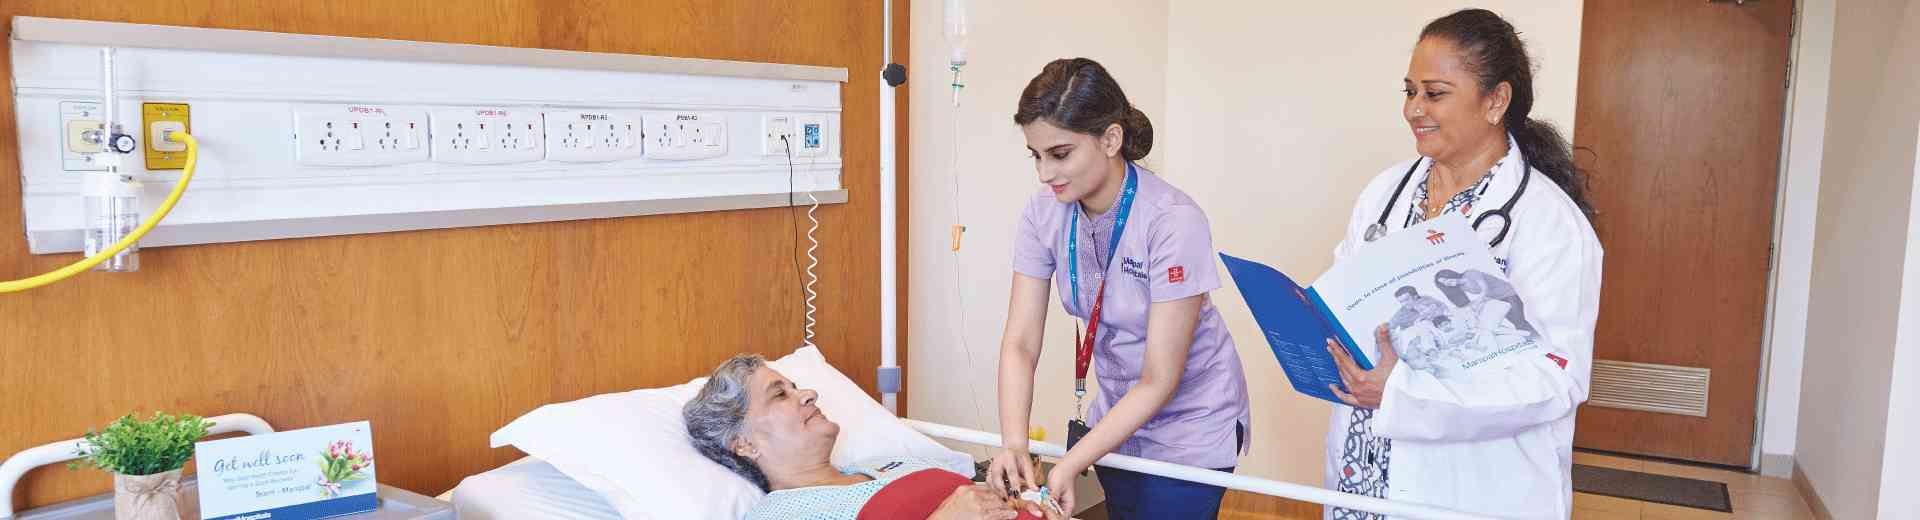 Outpatient Inpatient and Emergency Services in Jaipur